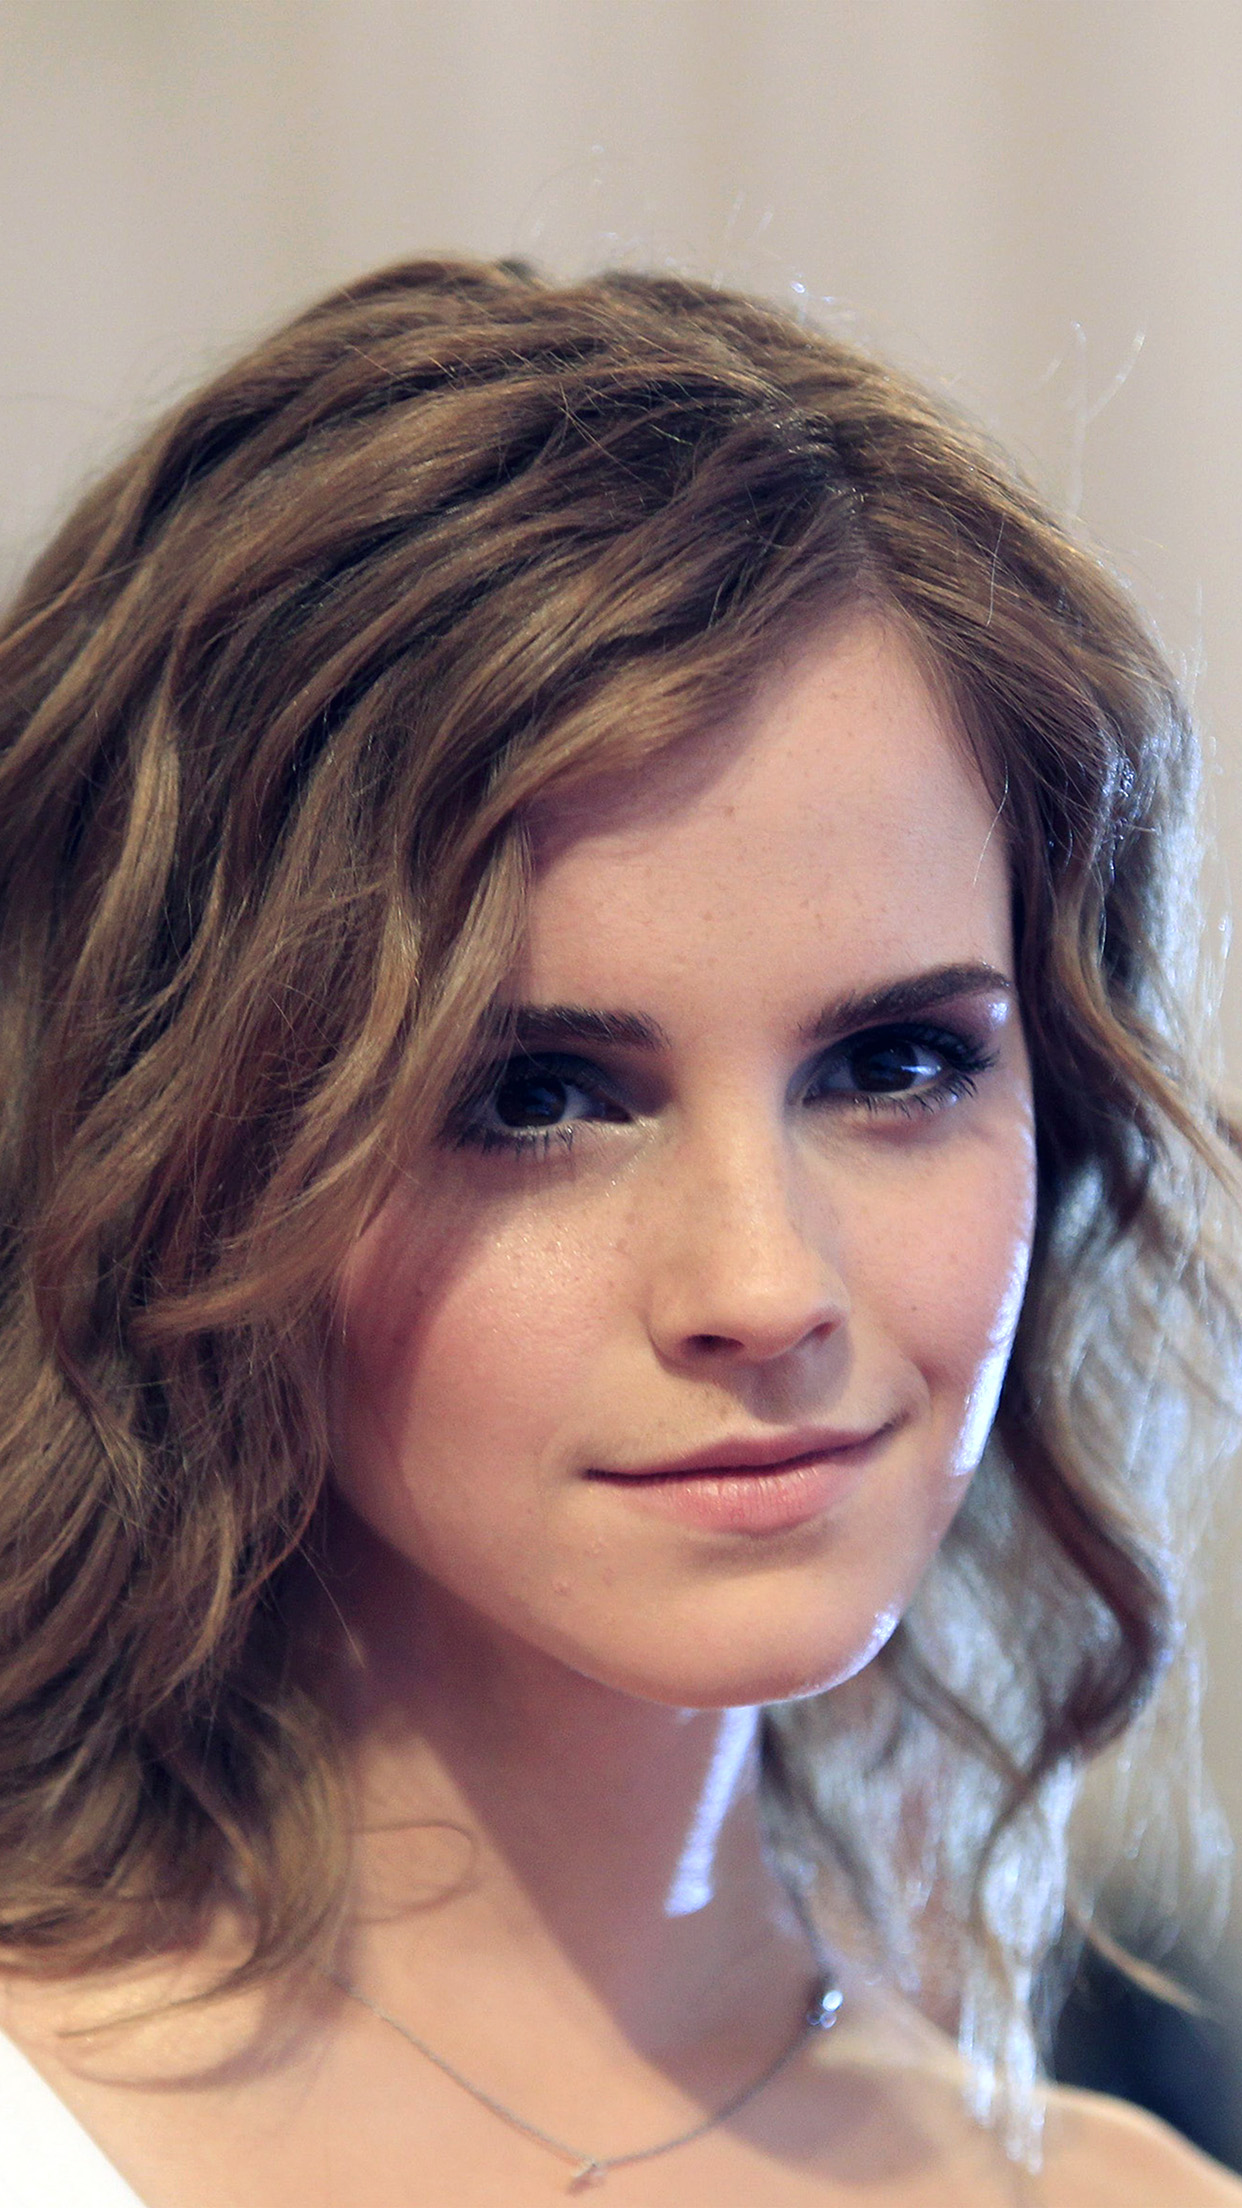 Emma Watson Face Actress Celebrity Android wallpaper